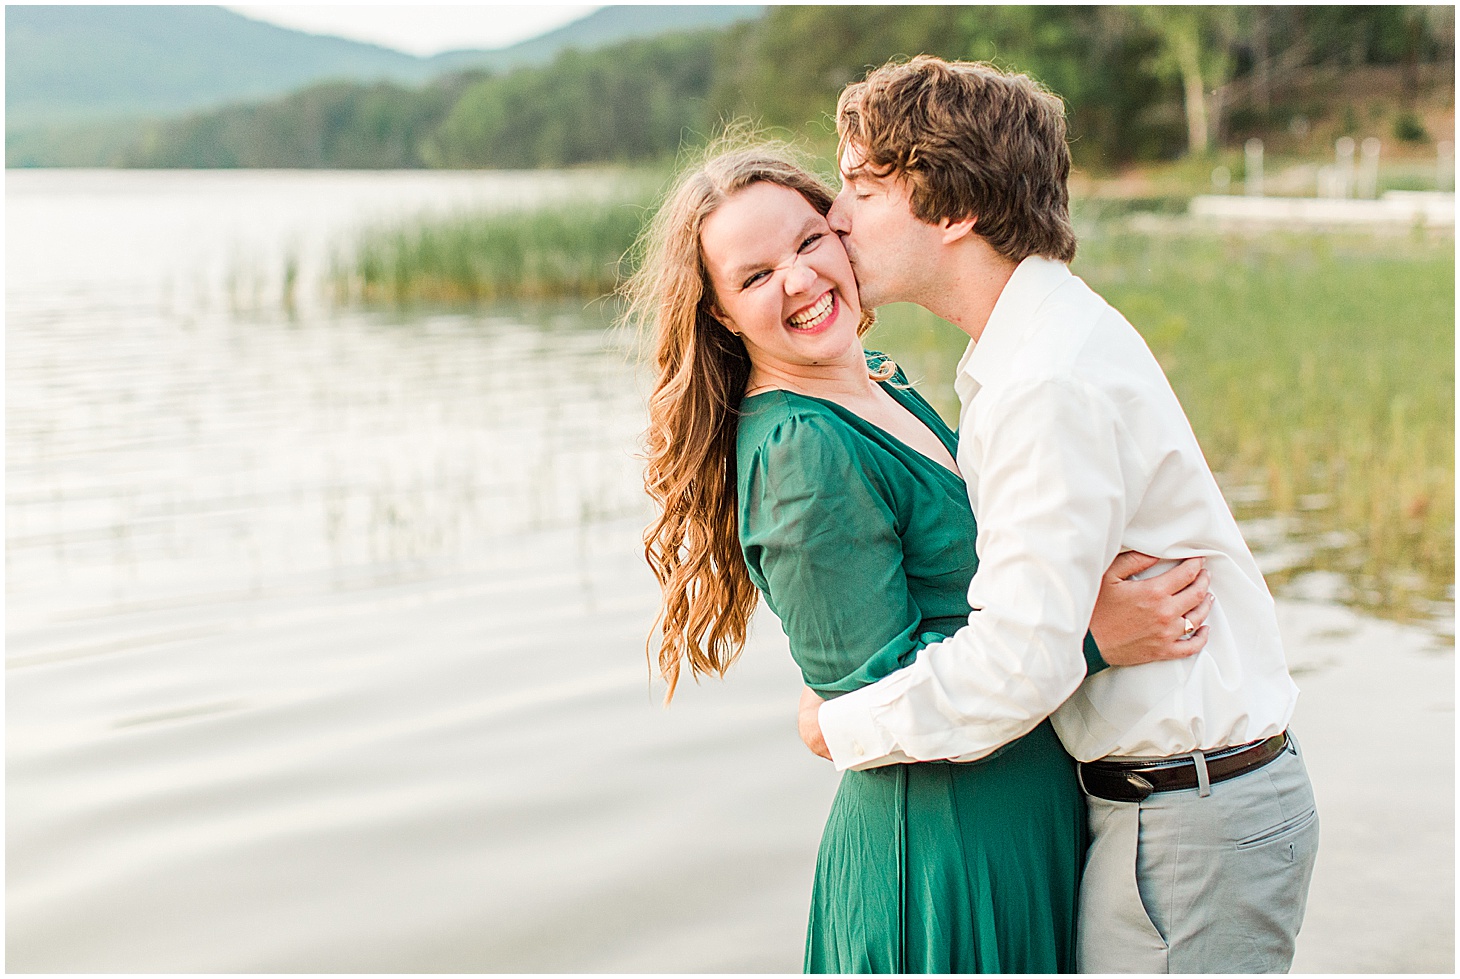 carvinscoveengagementsession_roanokeengagementsession_carvinscove_virginiawedding_virginiaweddingphotographer_vaweddingphotographer_photo_0077.jpg